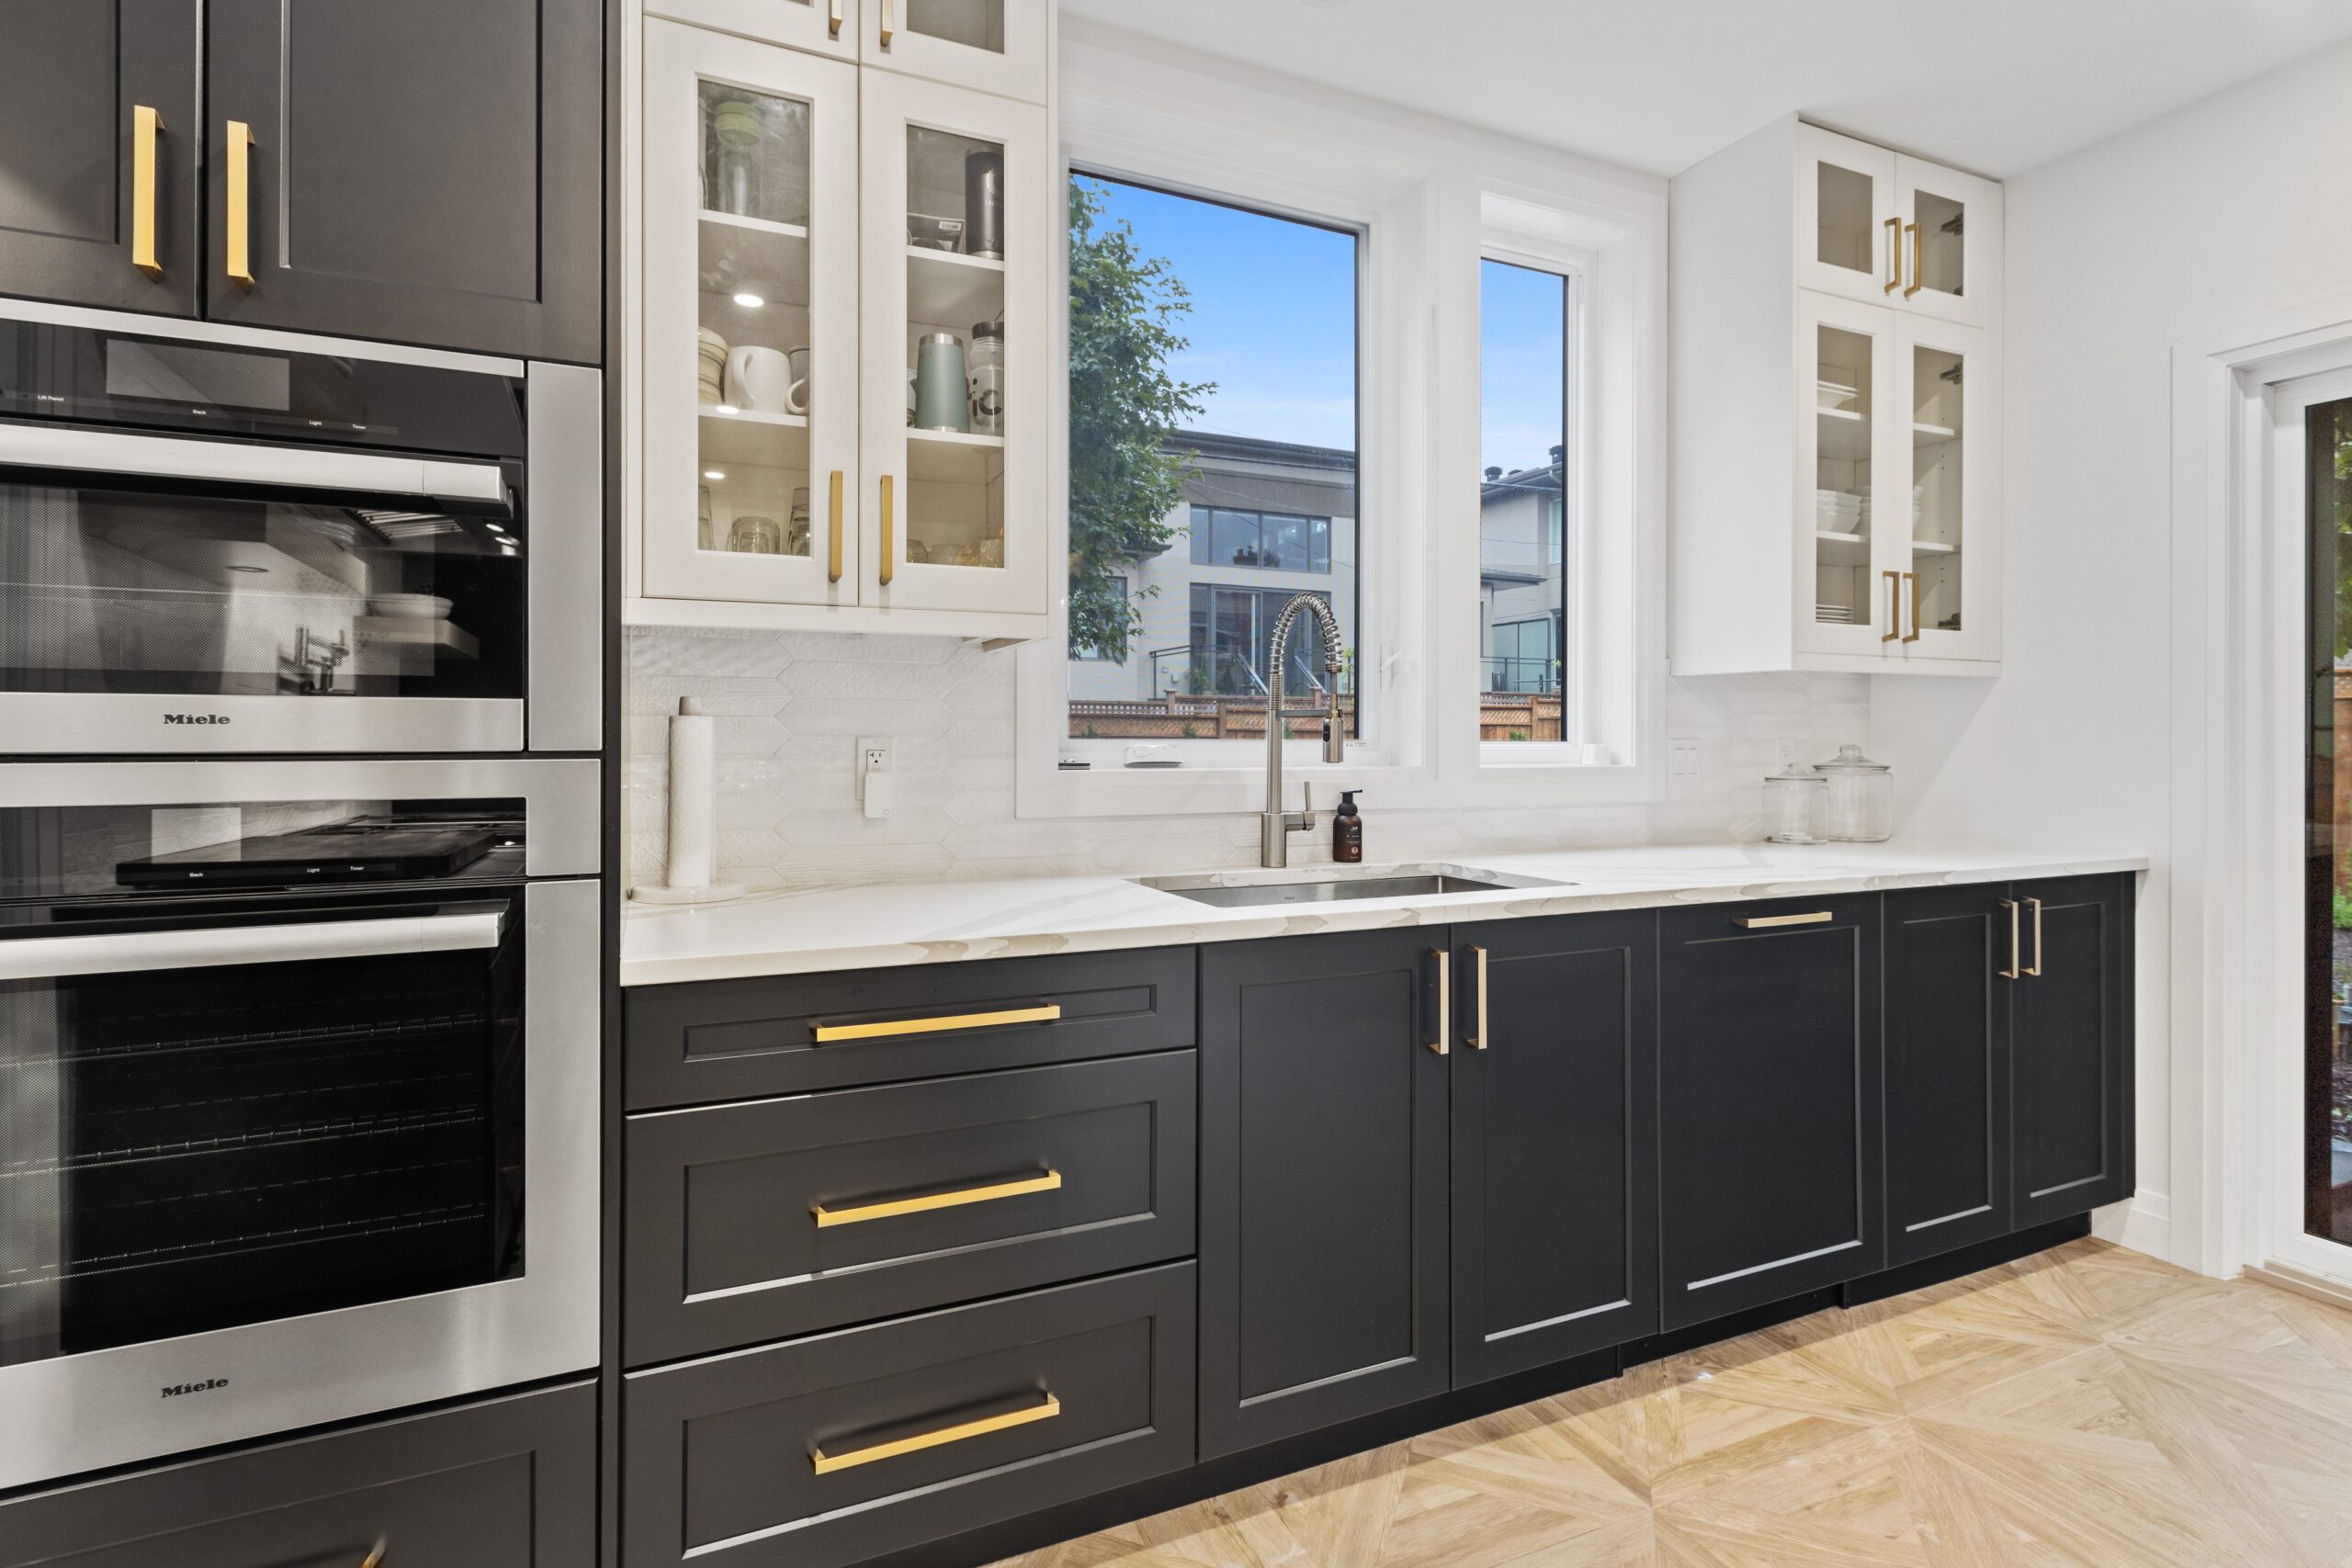 Expertly painted kitchen cabinets showcasing a flawless finish, adding a touch of elegance to the heart of the home.